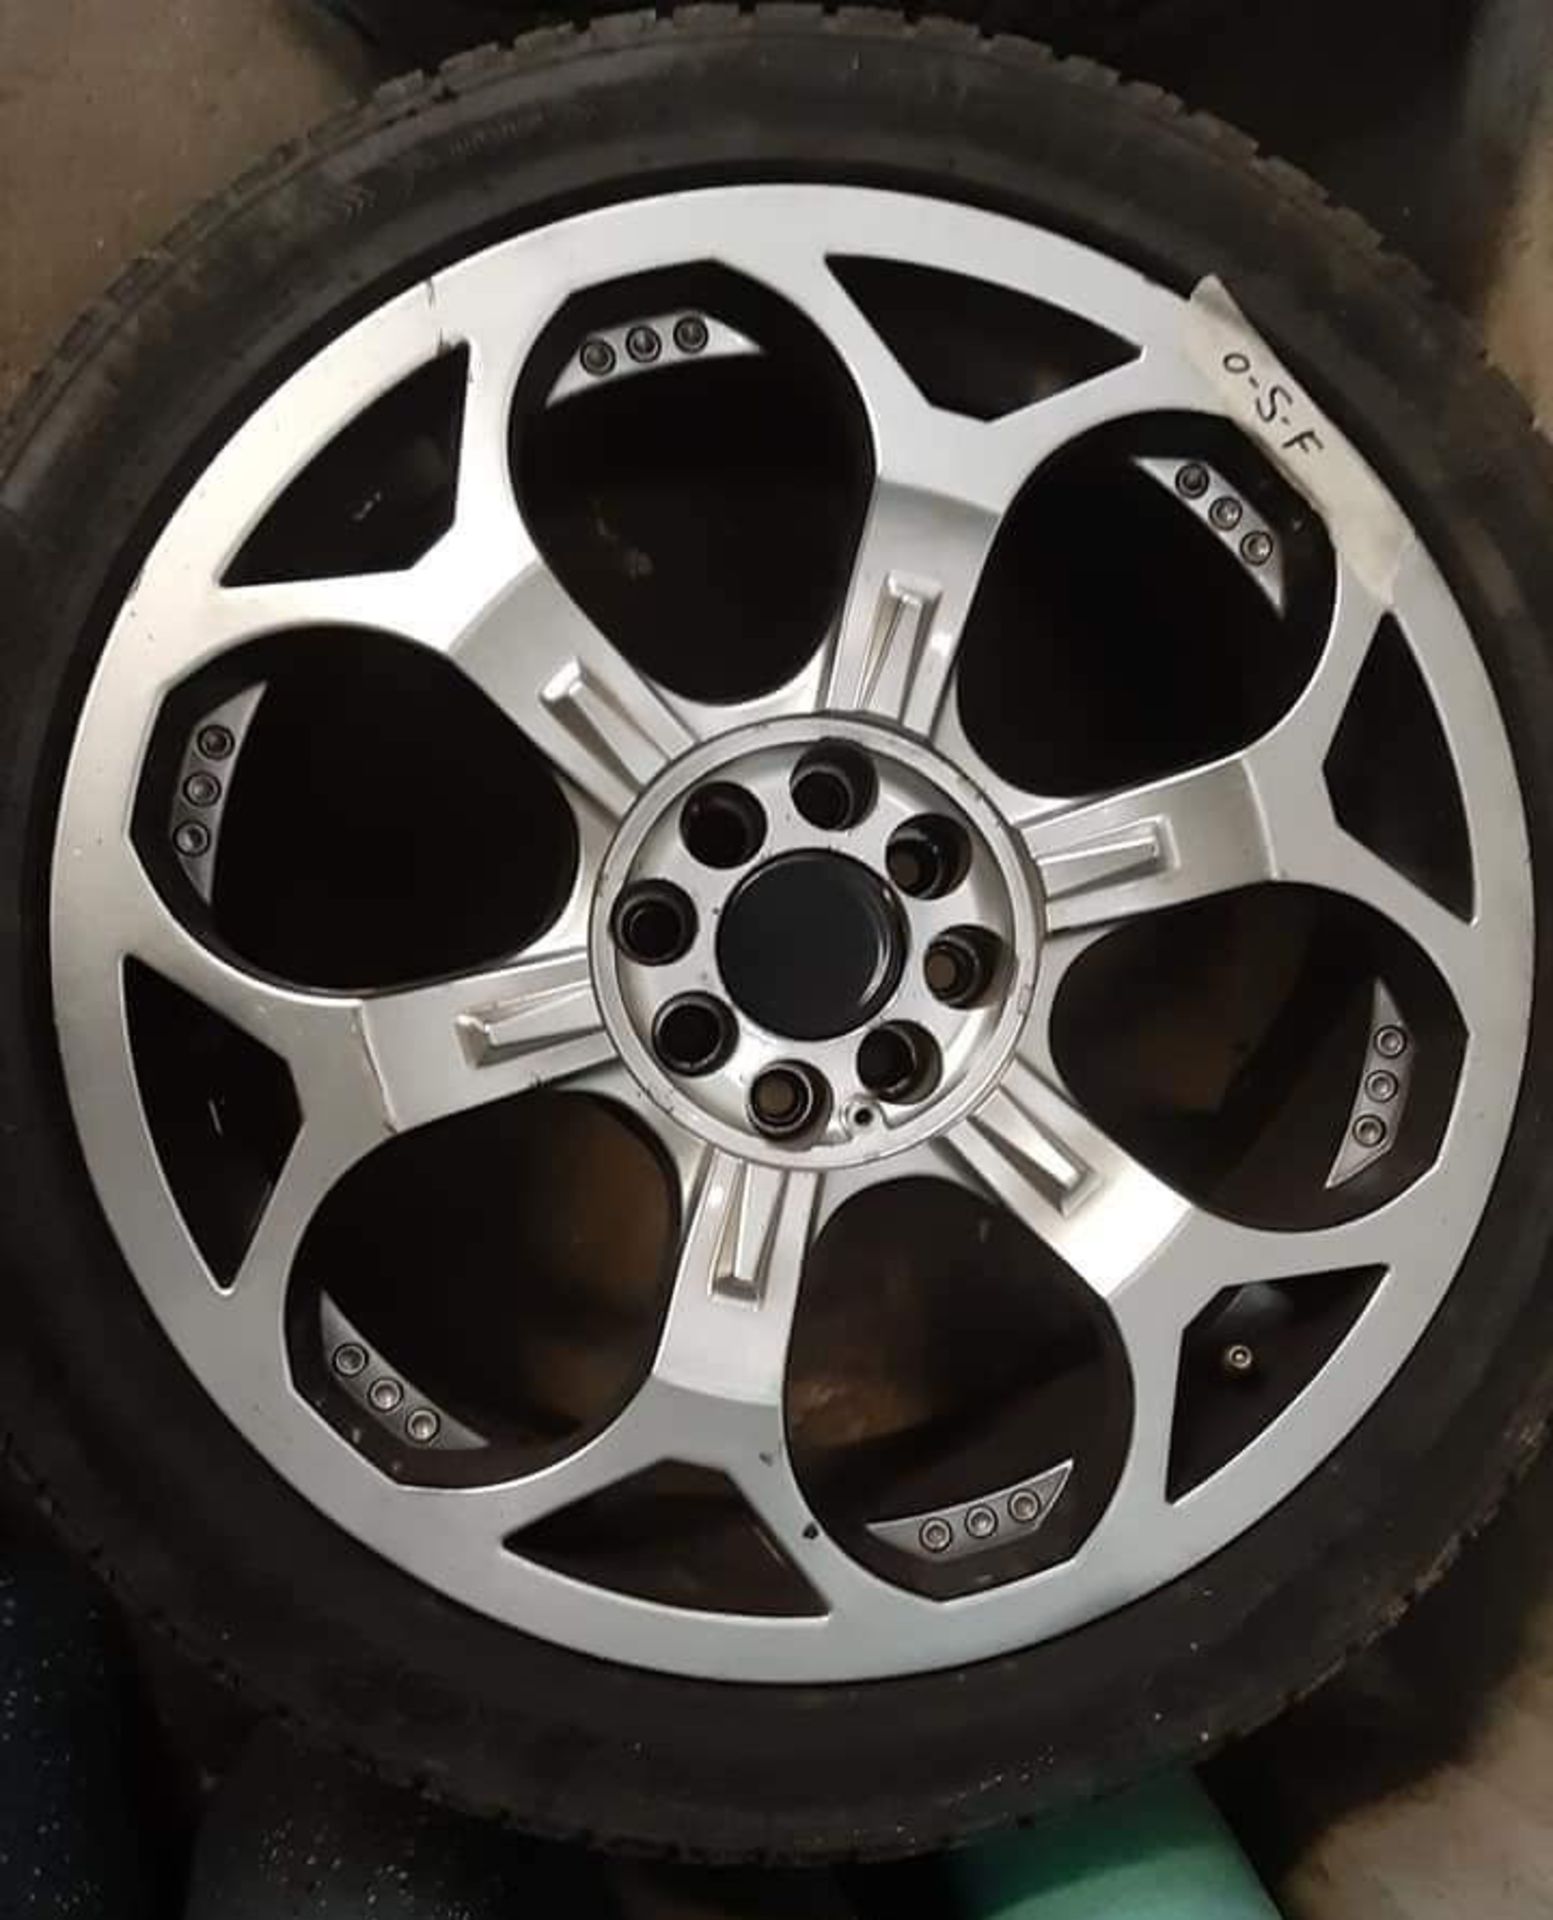 Set of 4 Multi Fitment 4 Stud 17" x 7.0" Alloy Wheels with 205/45ZR17 Tyres - CL444 - No VAT on - Image 3 of 9